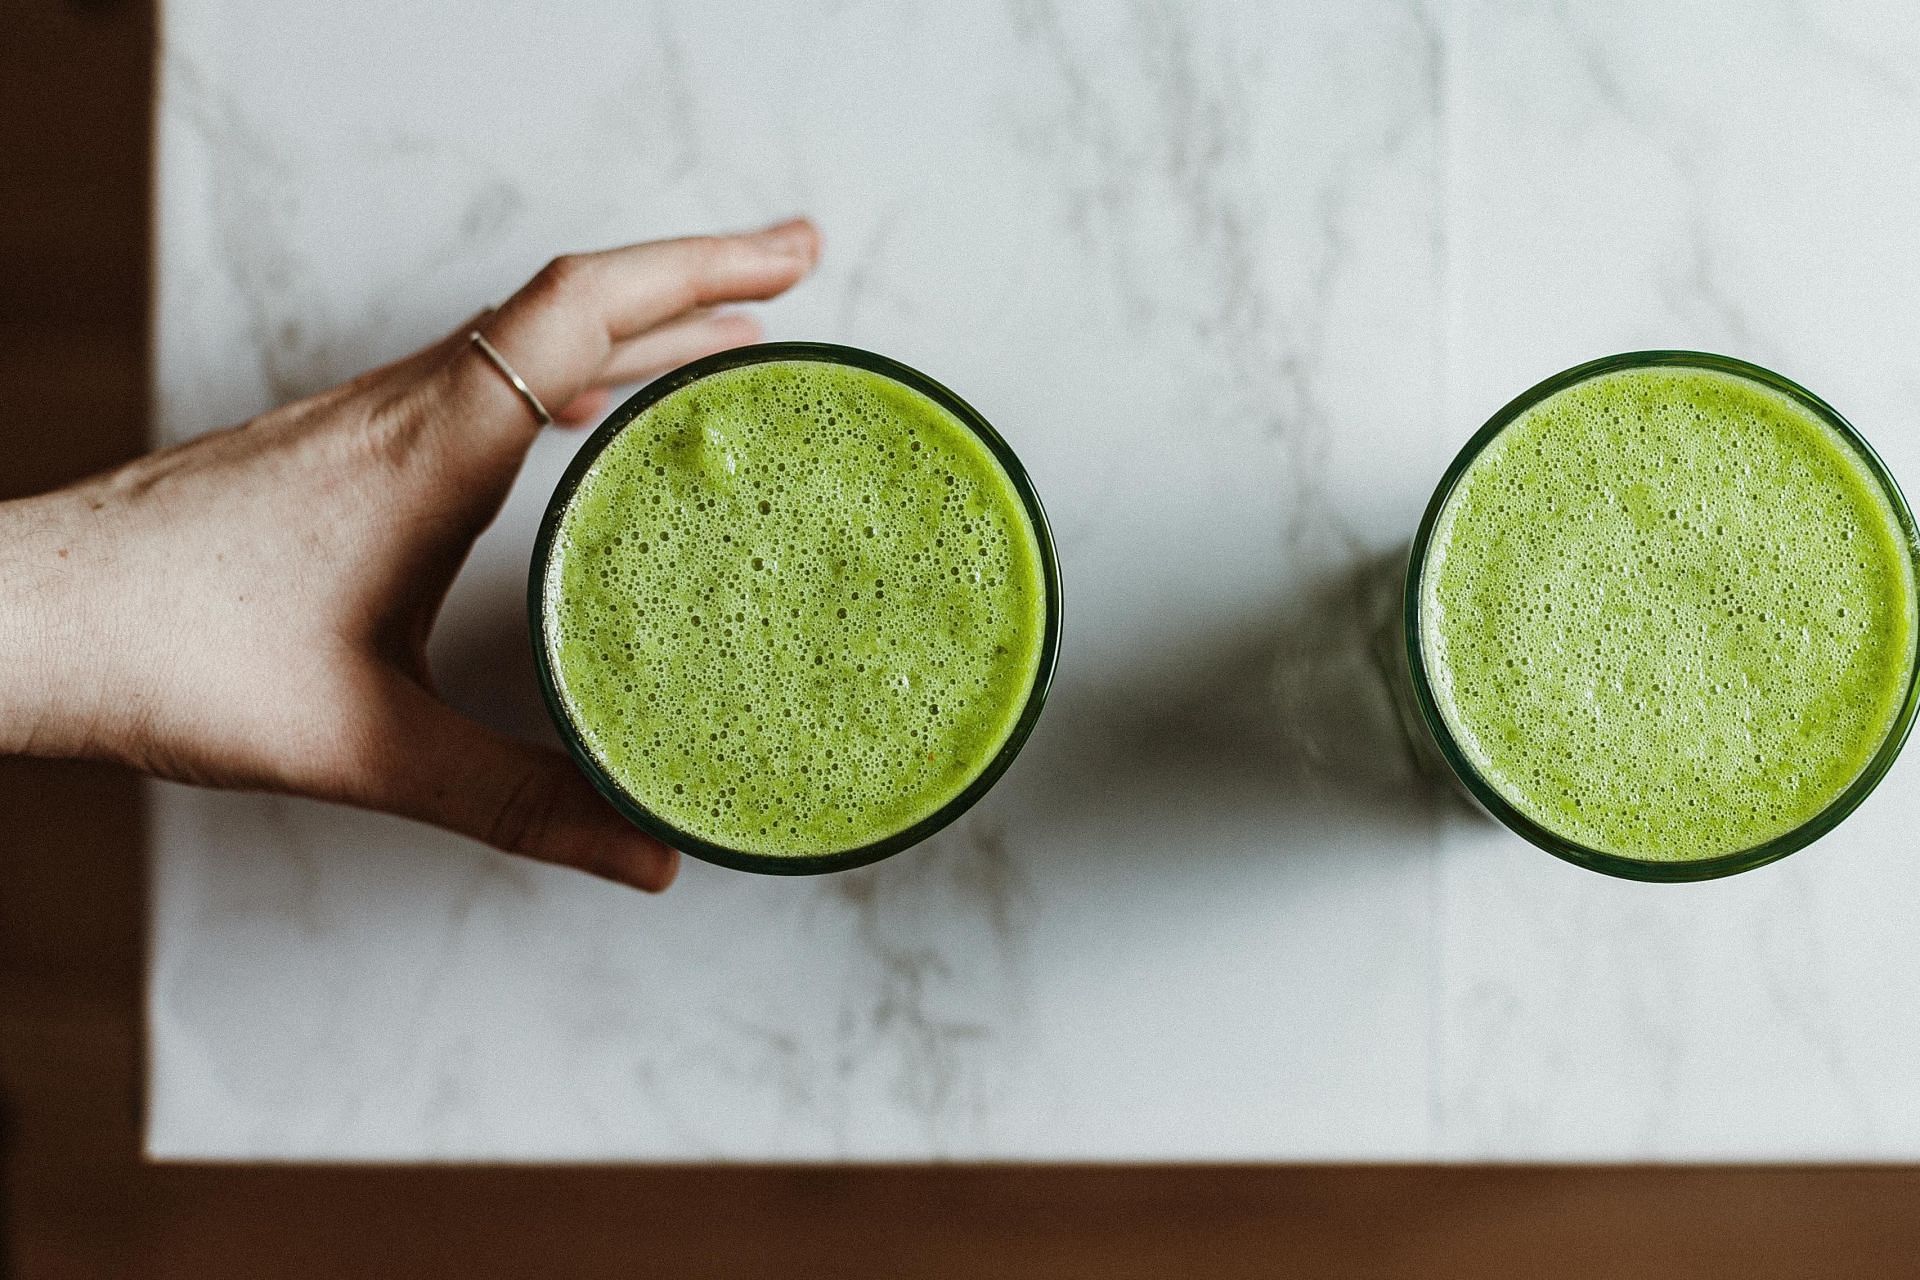 Drinking your greens is a great way to eat healthy. (Image via Unsplash/ Alex Lvrs)